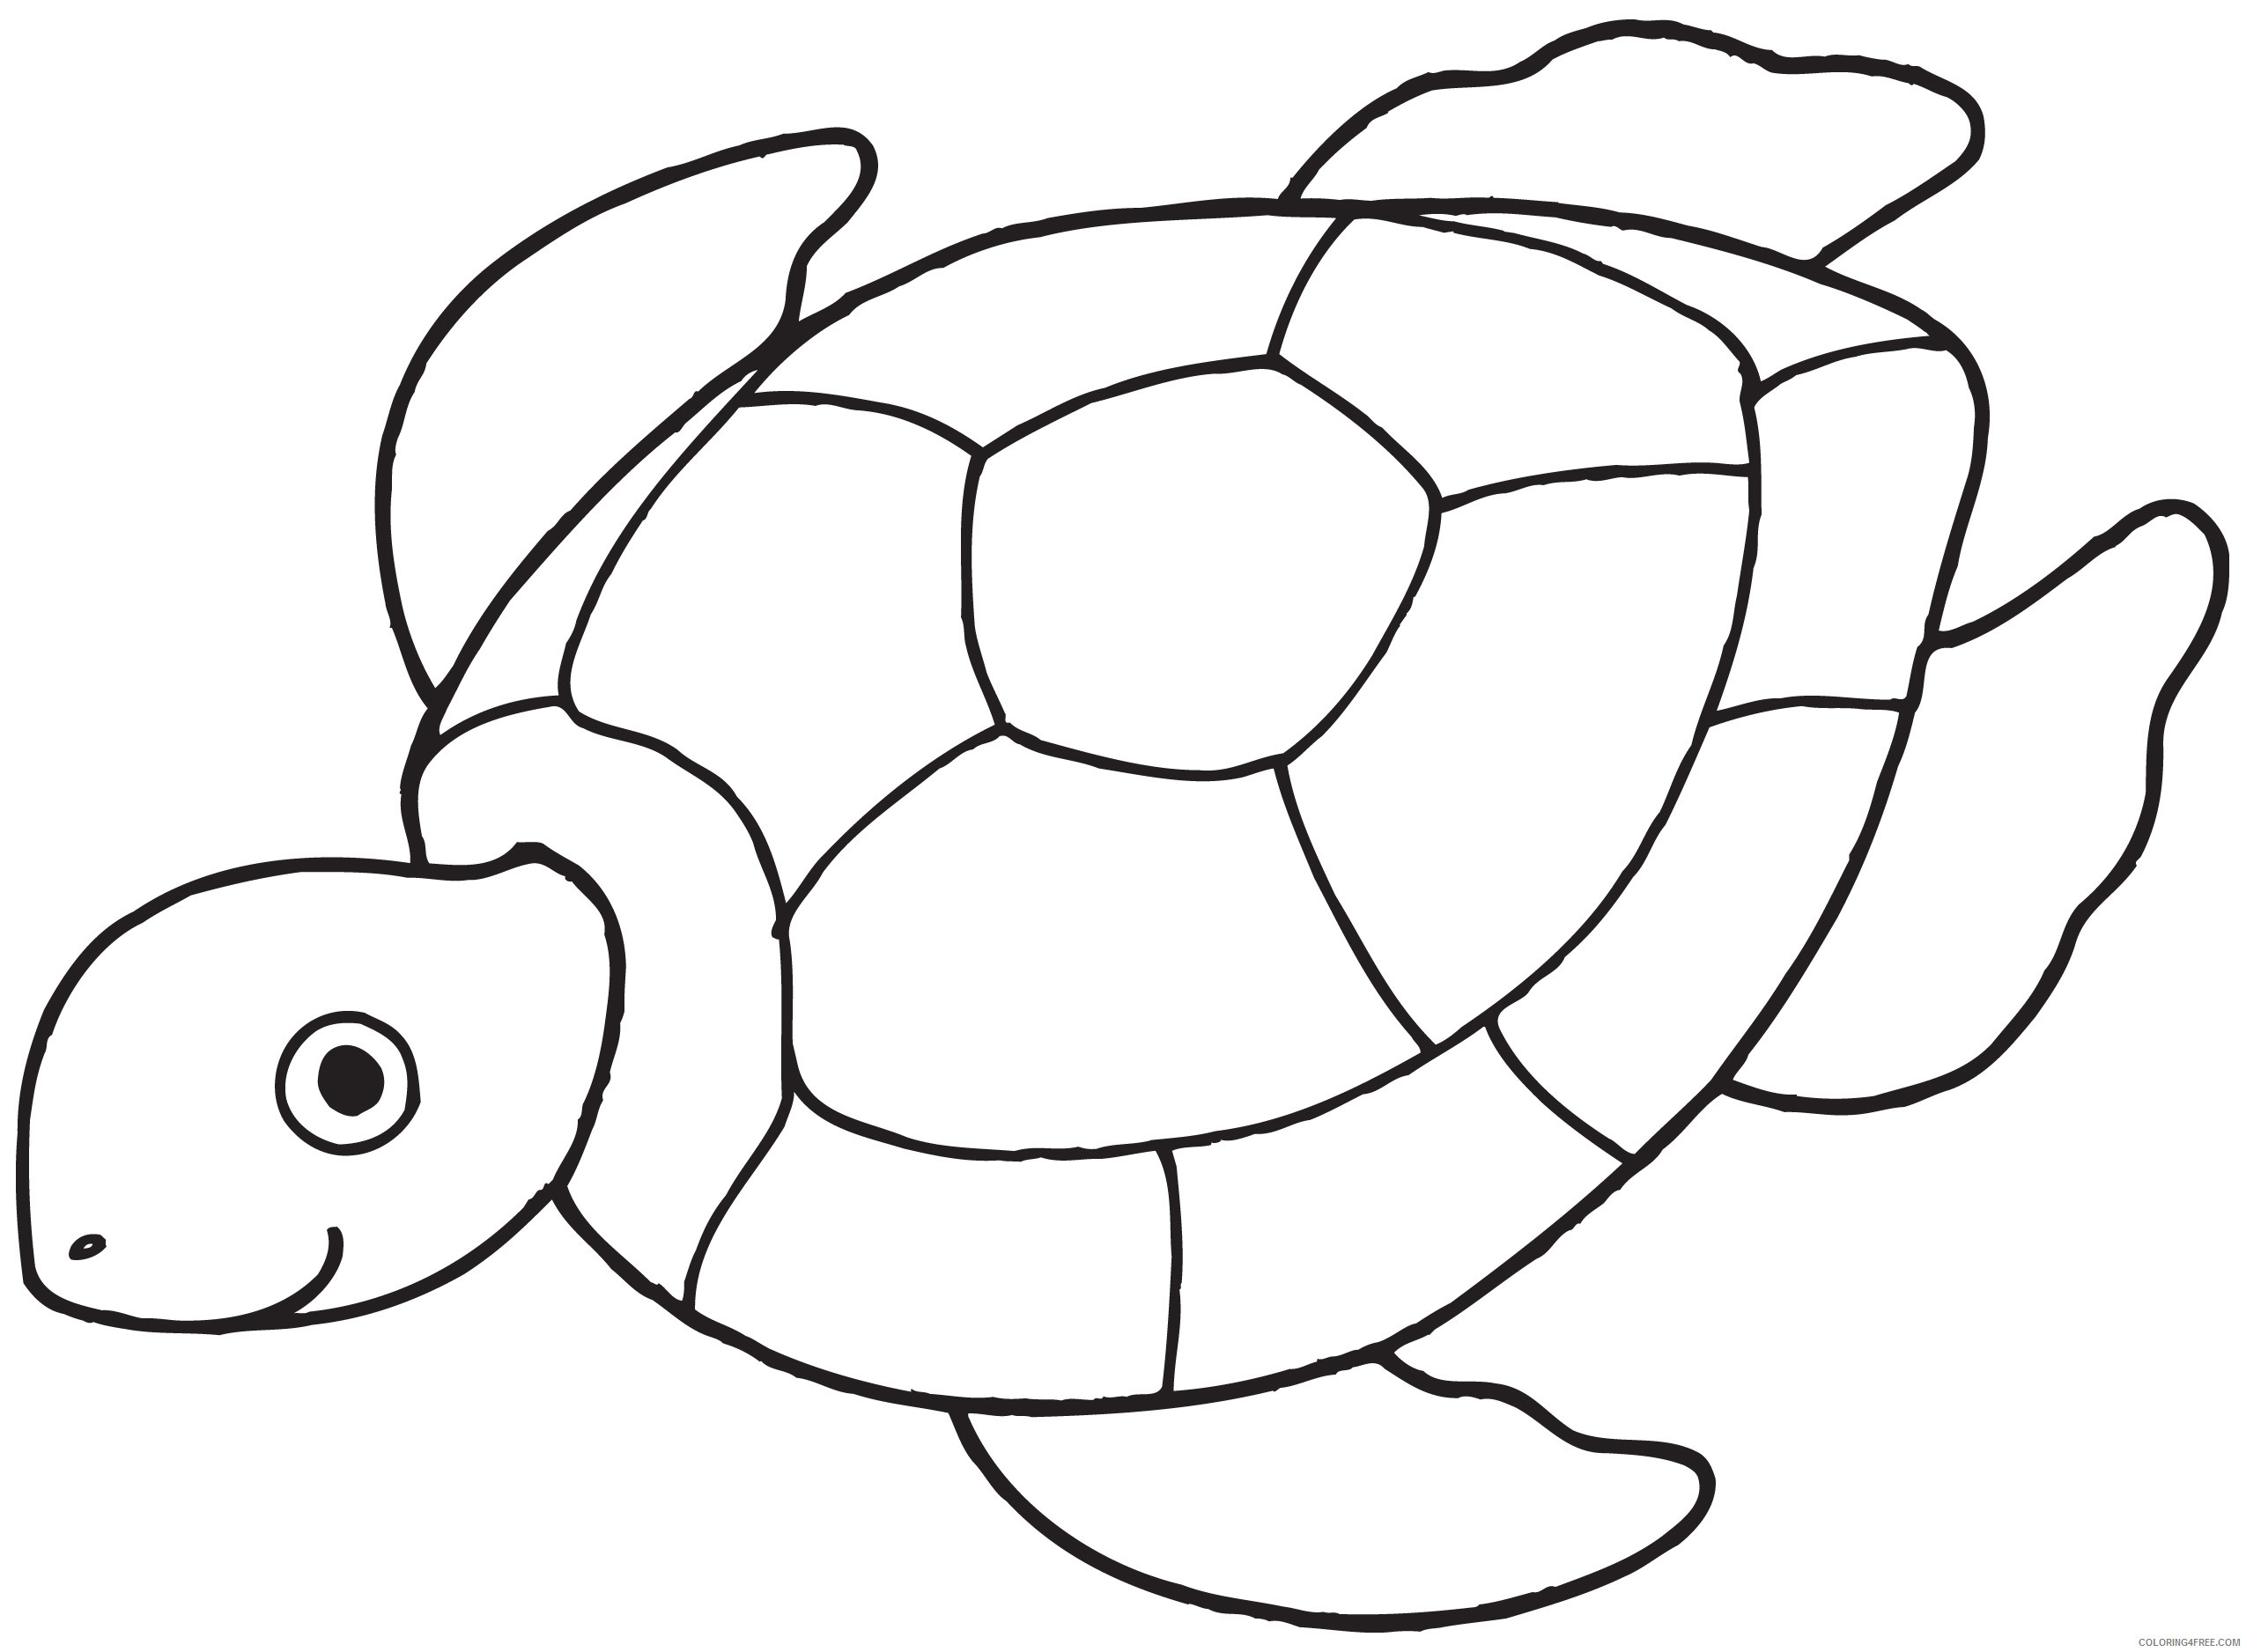 Turtle Outline Coloring Pages Lagger Head Sea Turtle For Printable Coloring4free Coloring4free Com